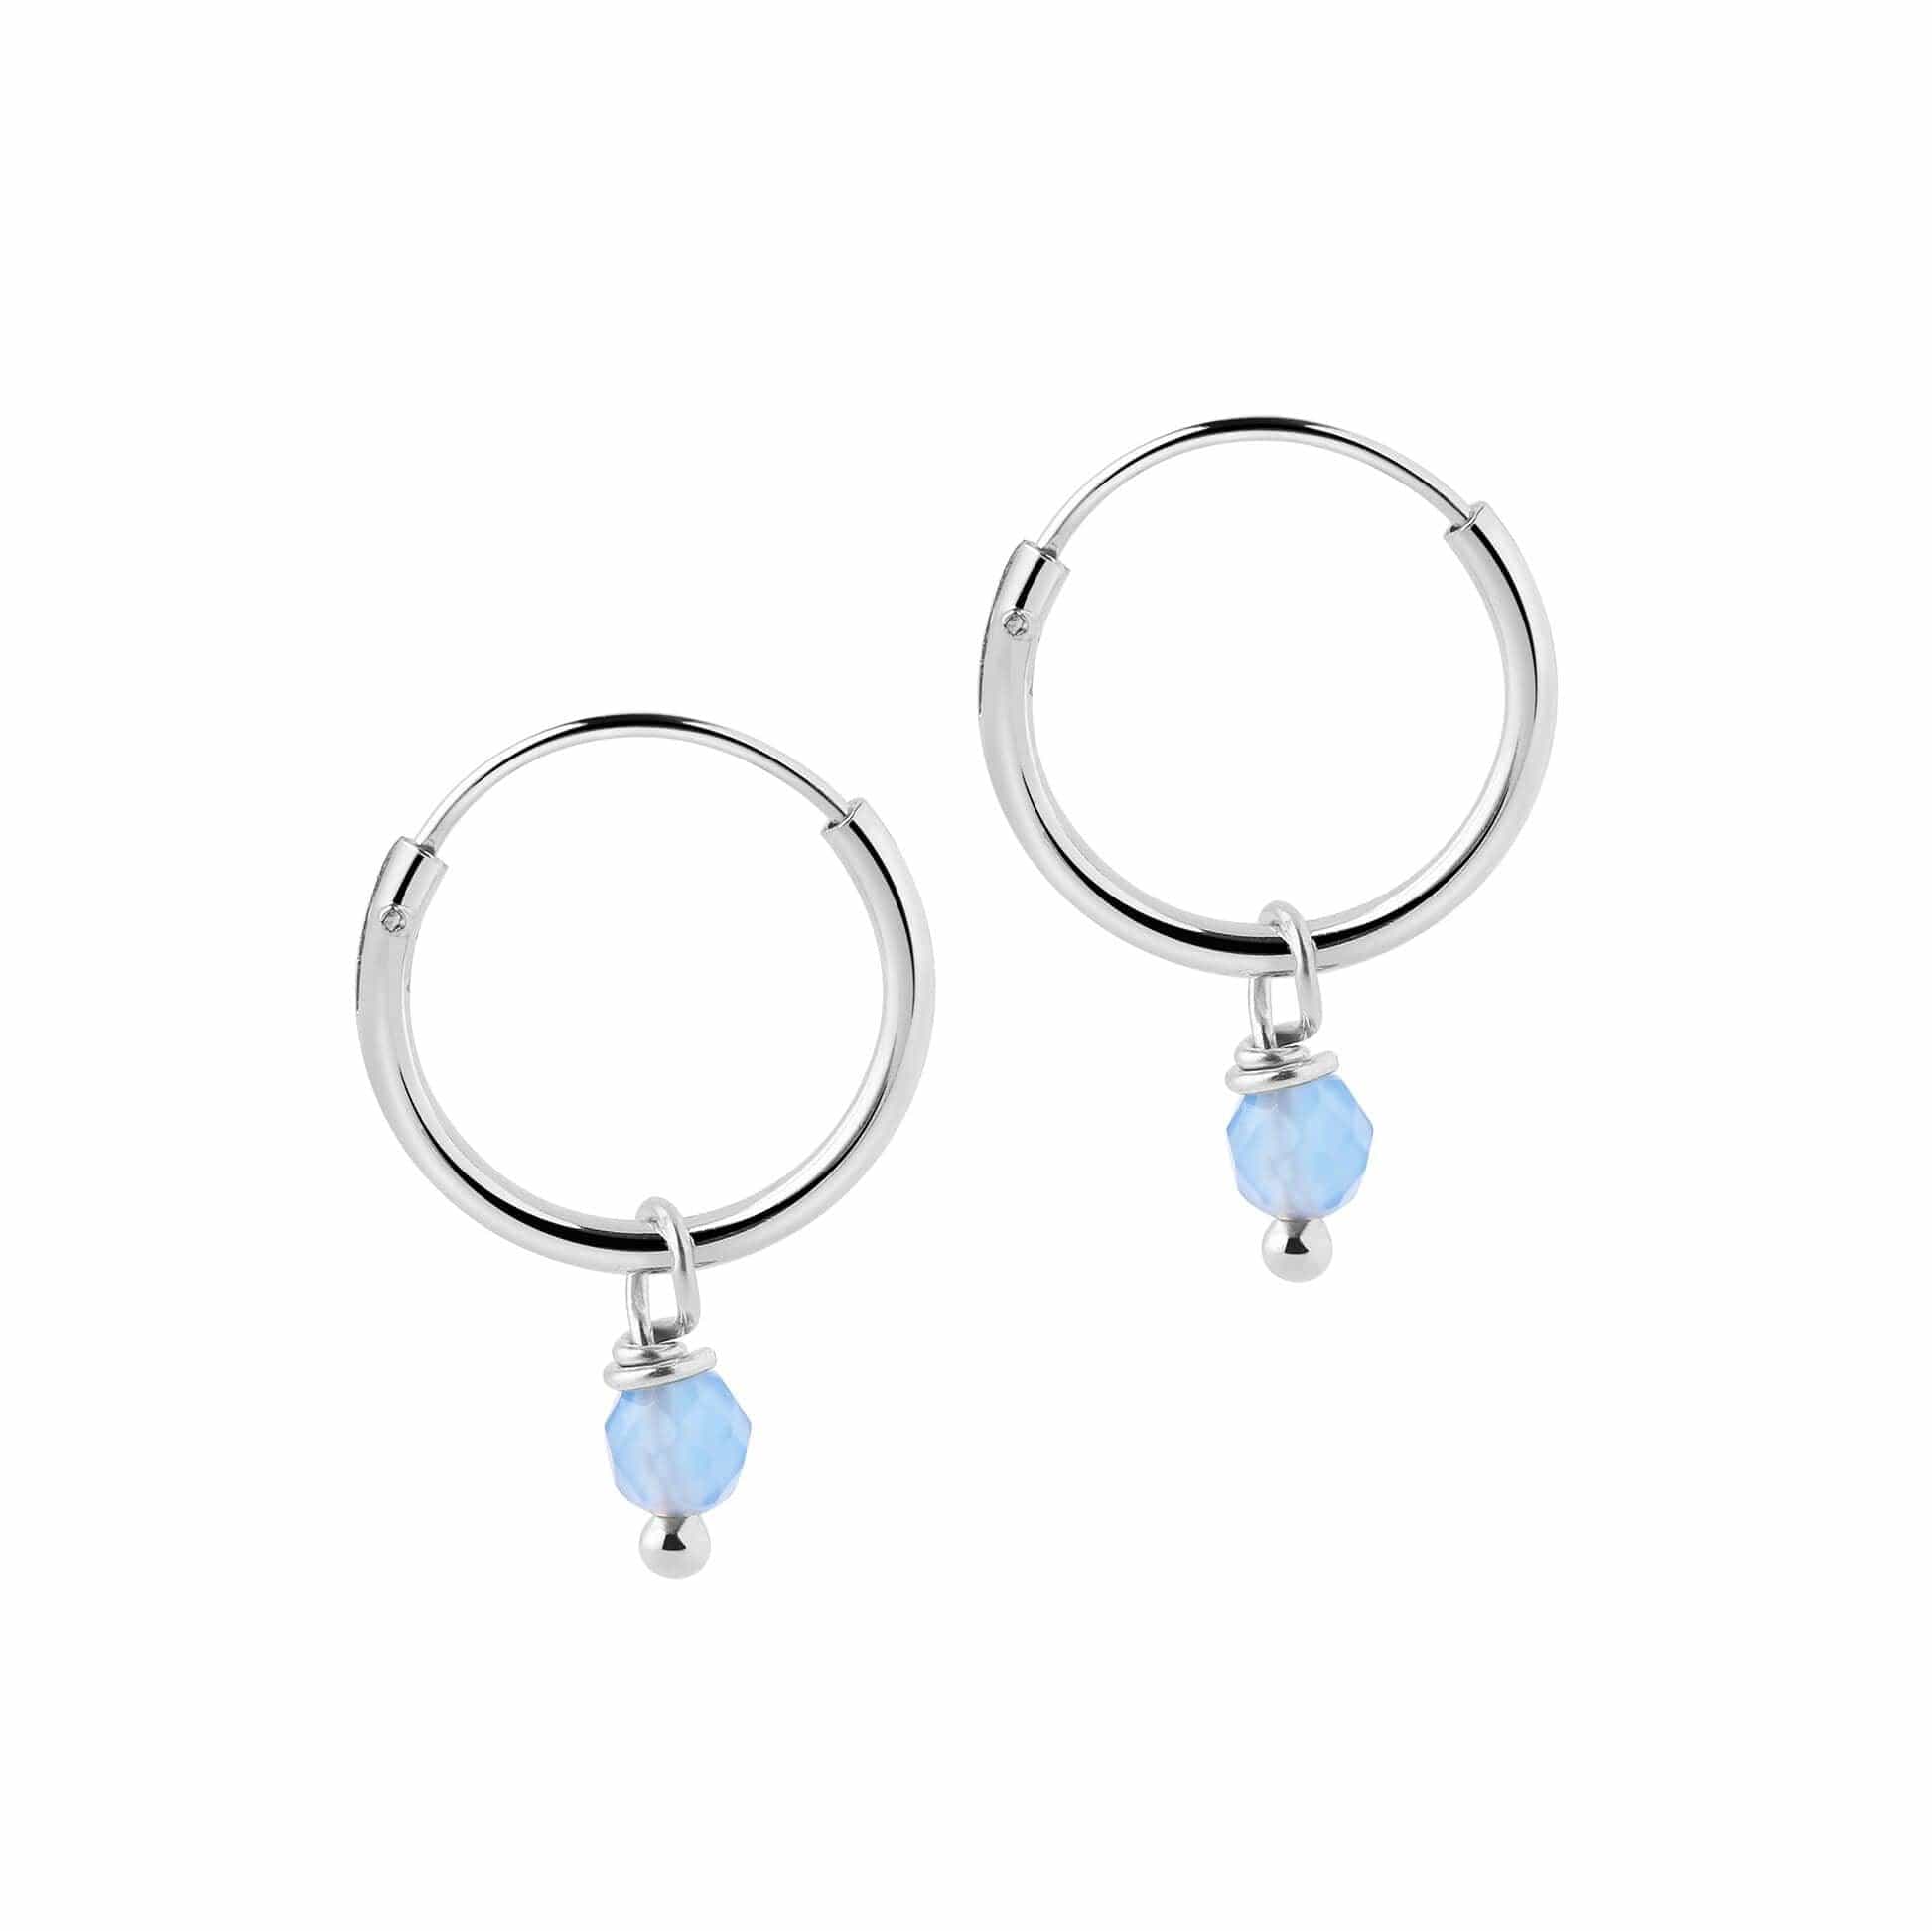 Small silver Hoop Earrings with Blue Stone